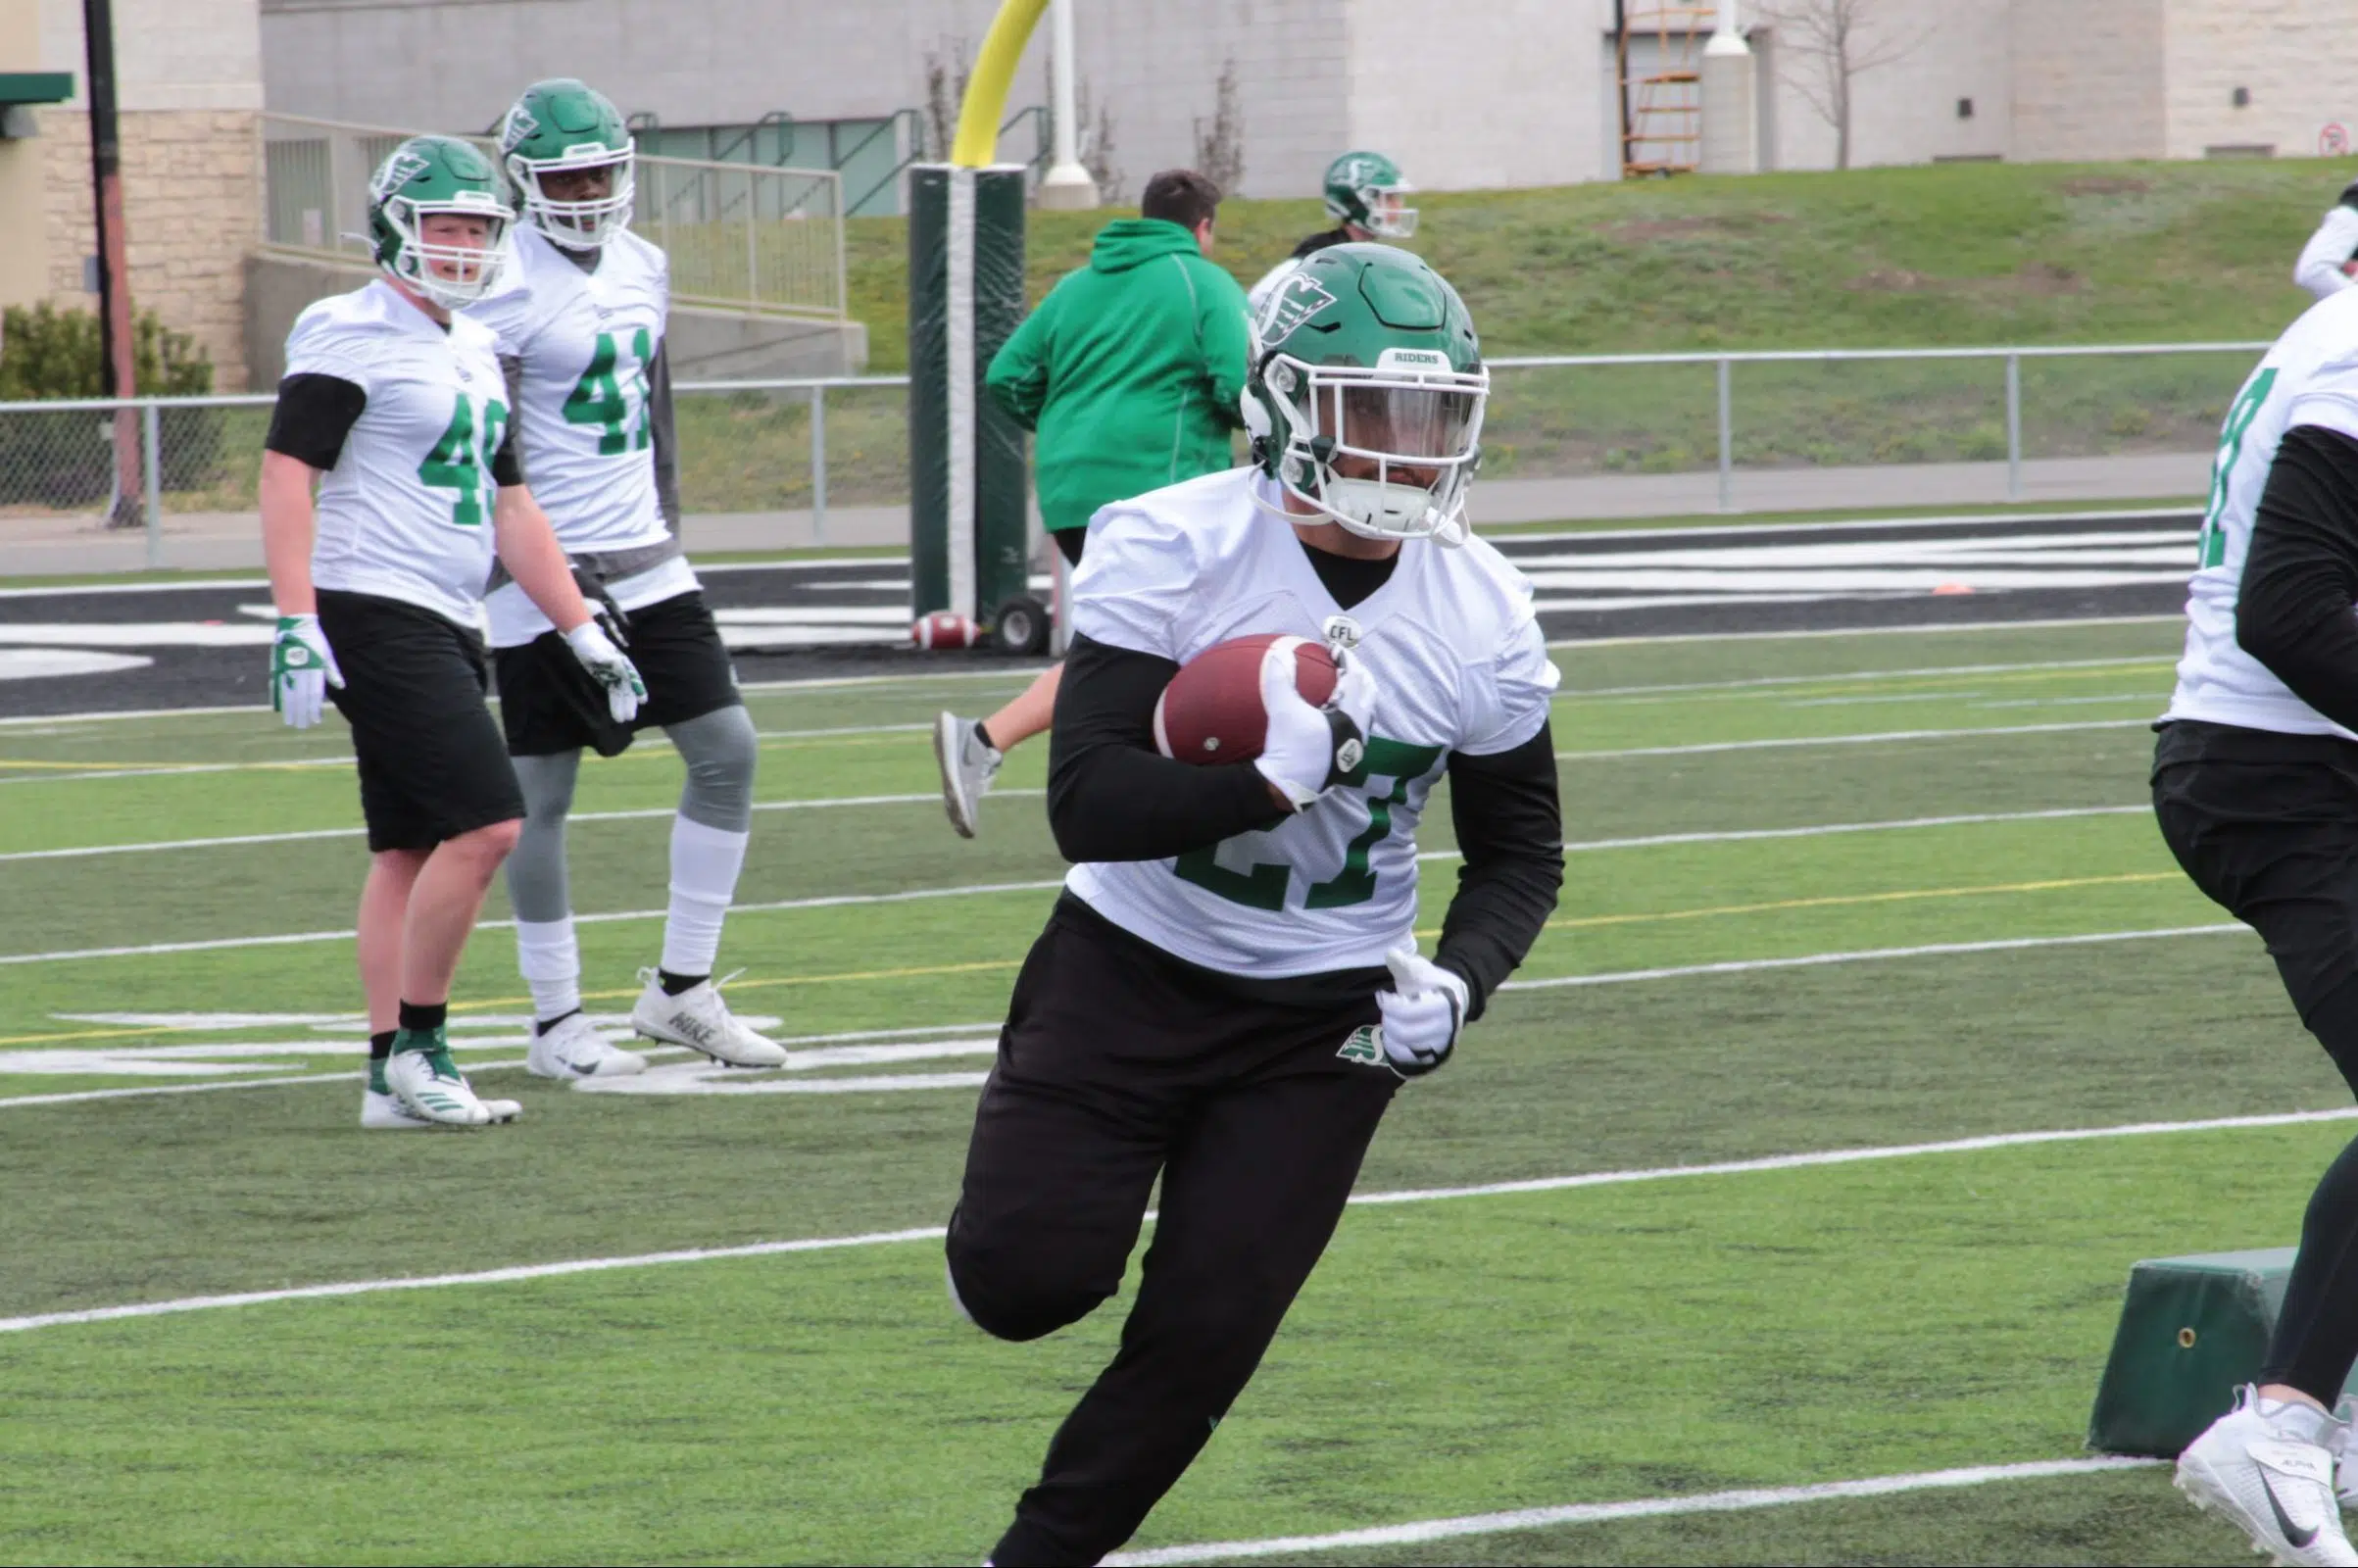 LaFrance, Banks among Riders' cuts; all three backup QBs still on roster